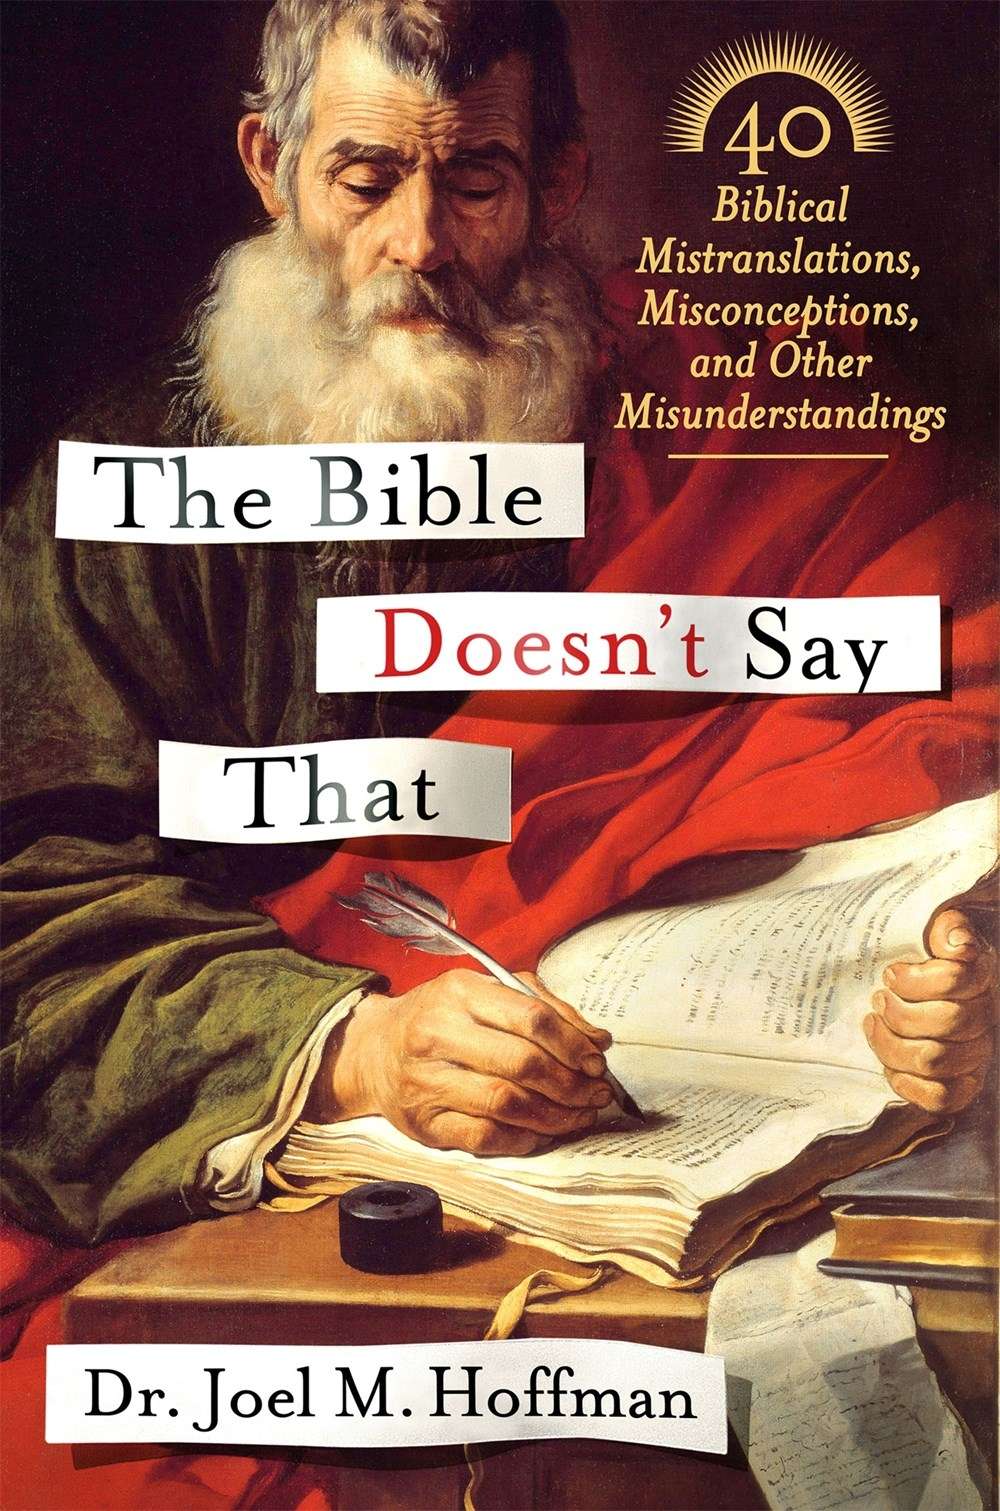 The Bible doesn't Say That